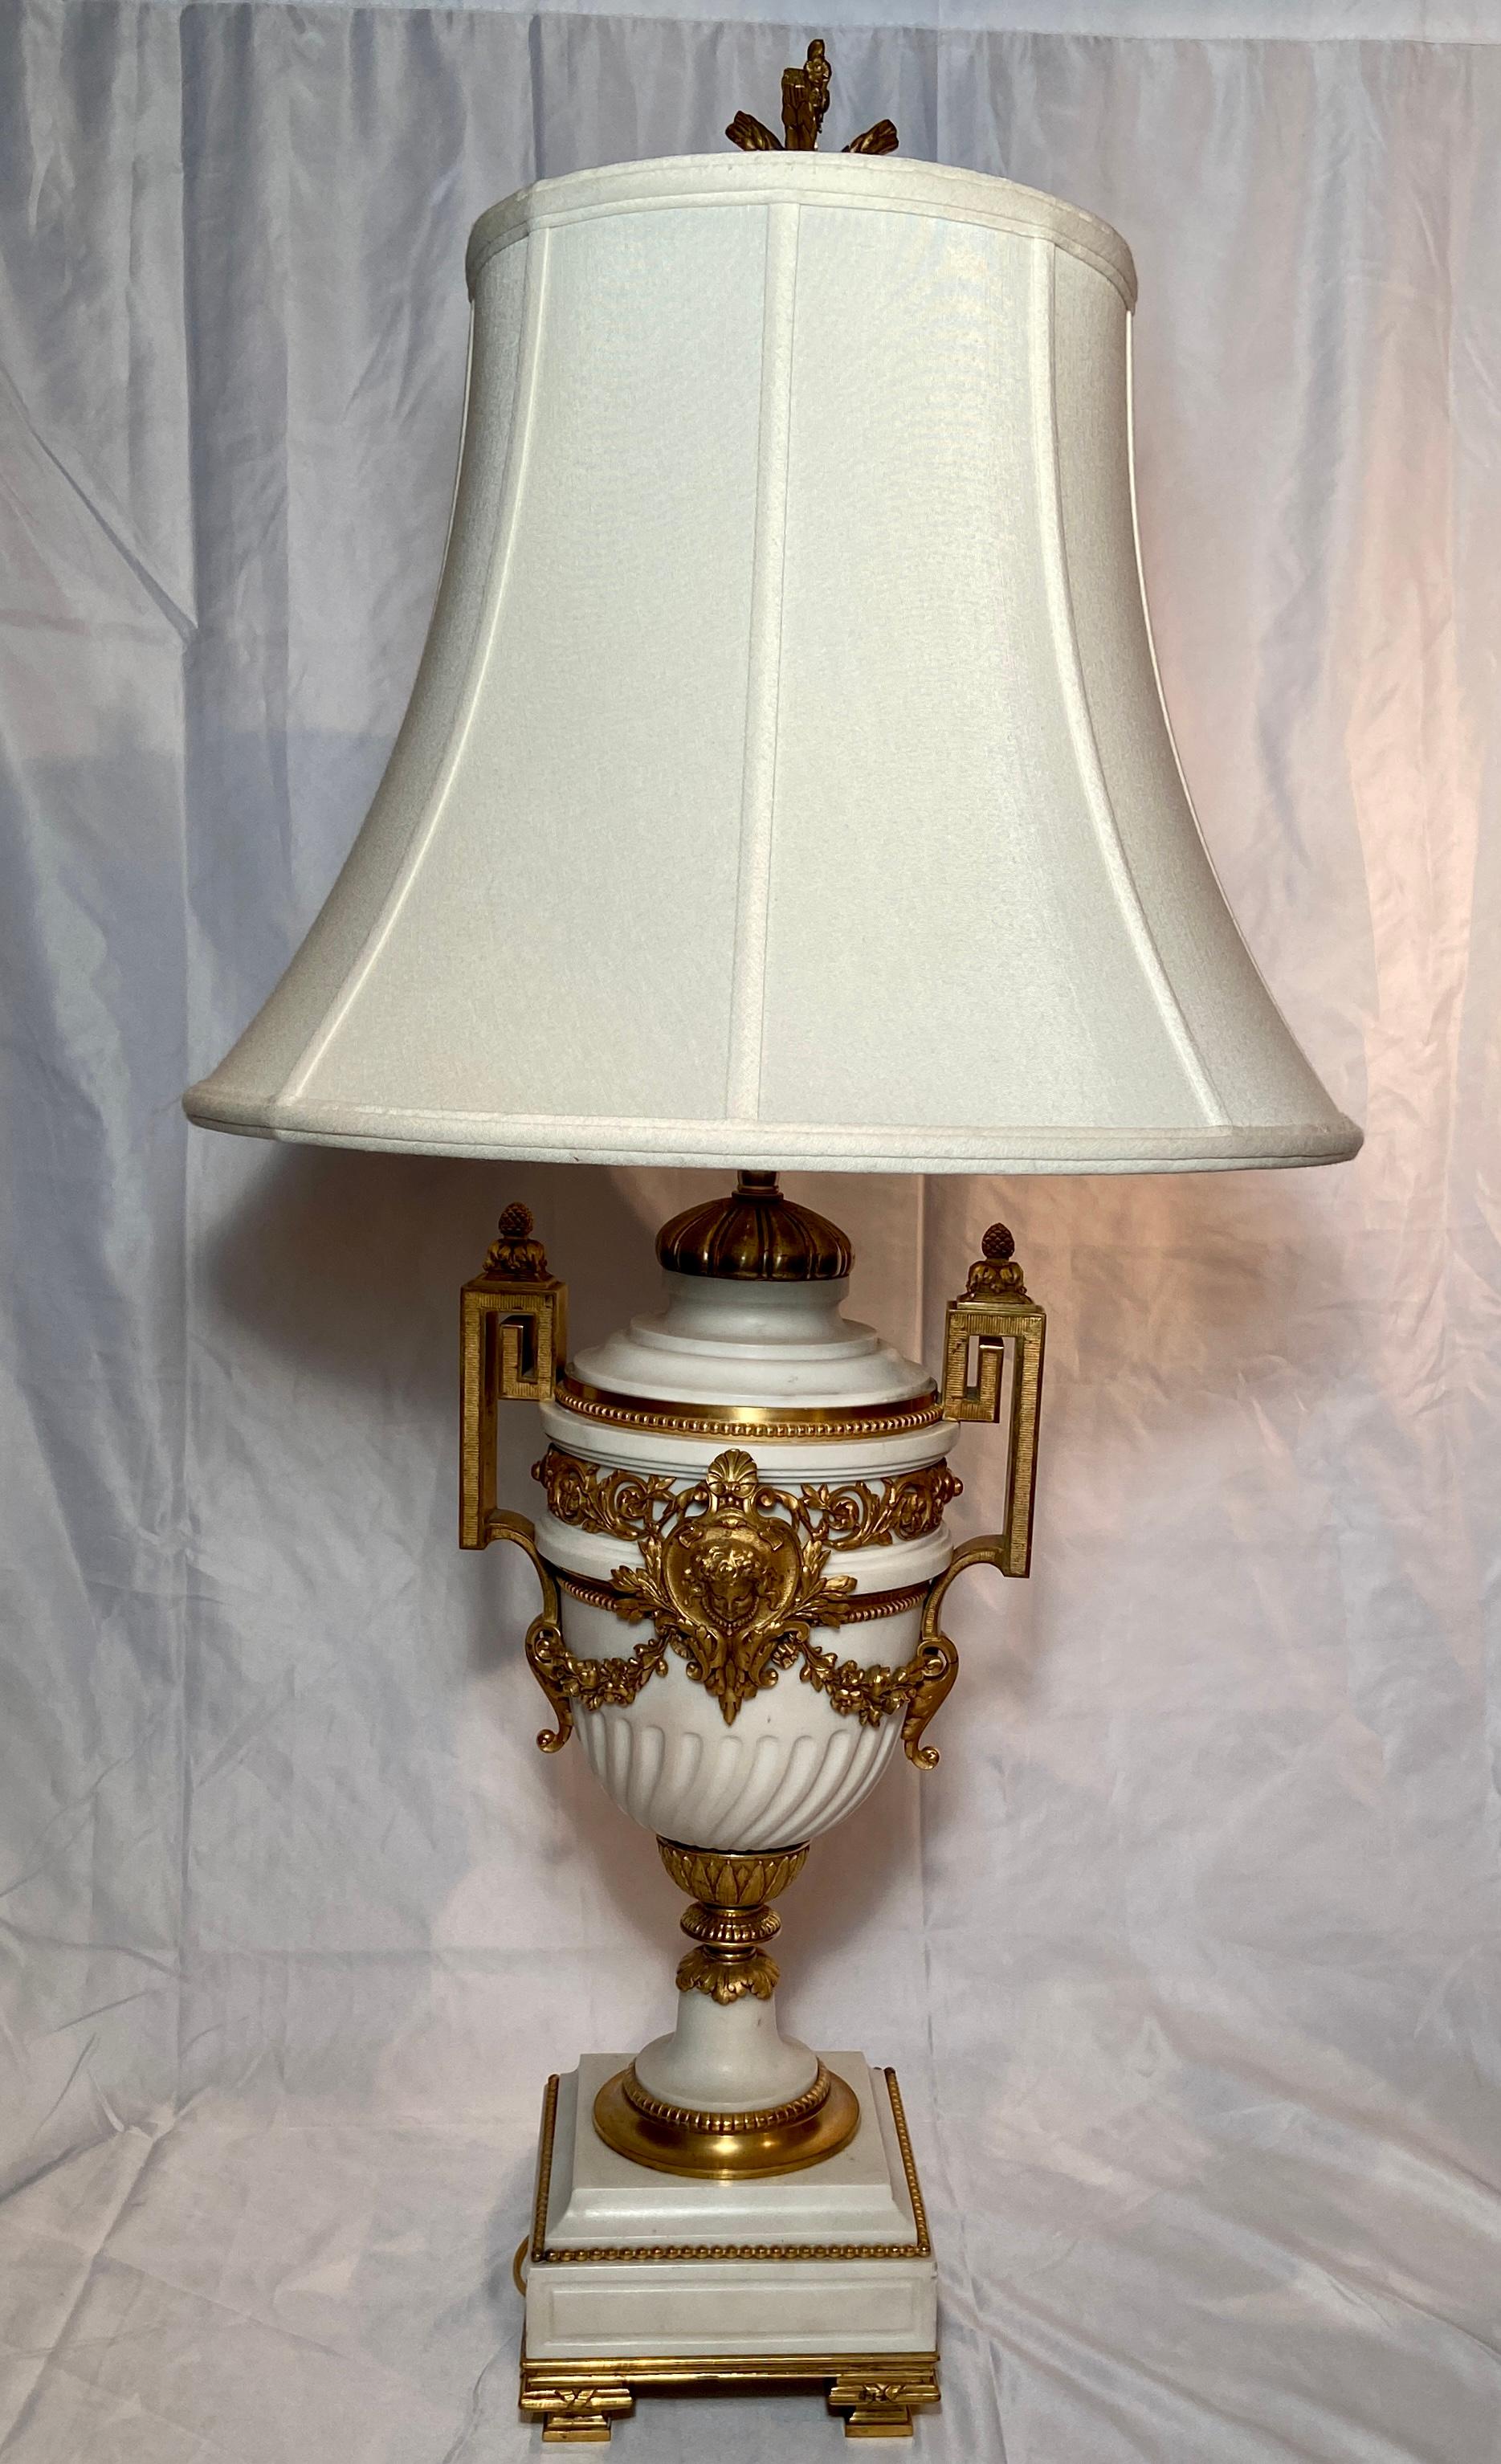 Pair antique French Louis XVI Style white marble and ormolu urn lamps, Circa 1840-1860.